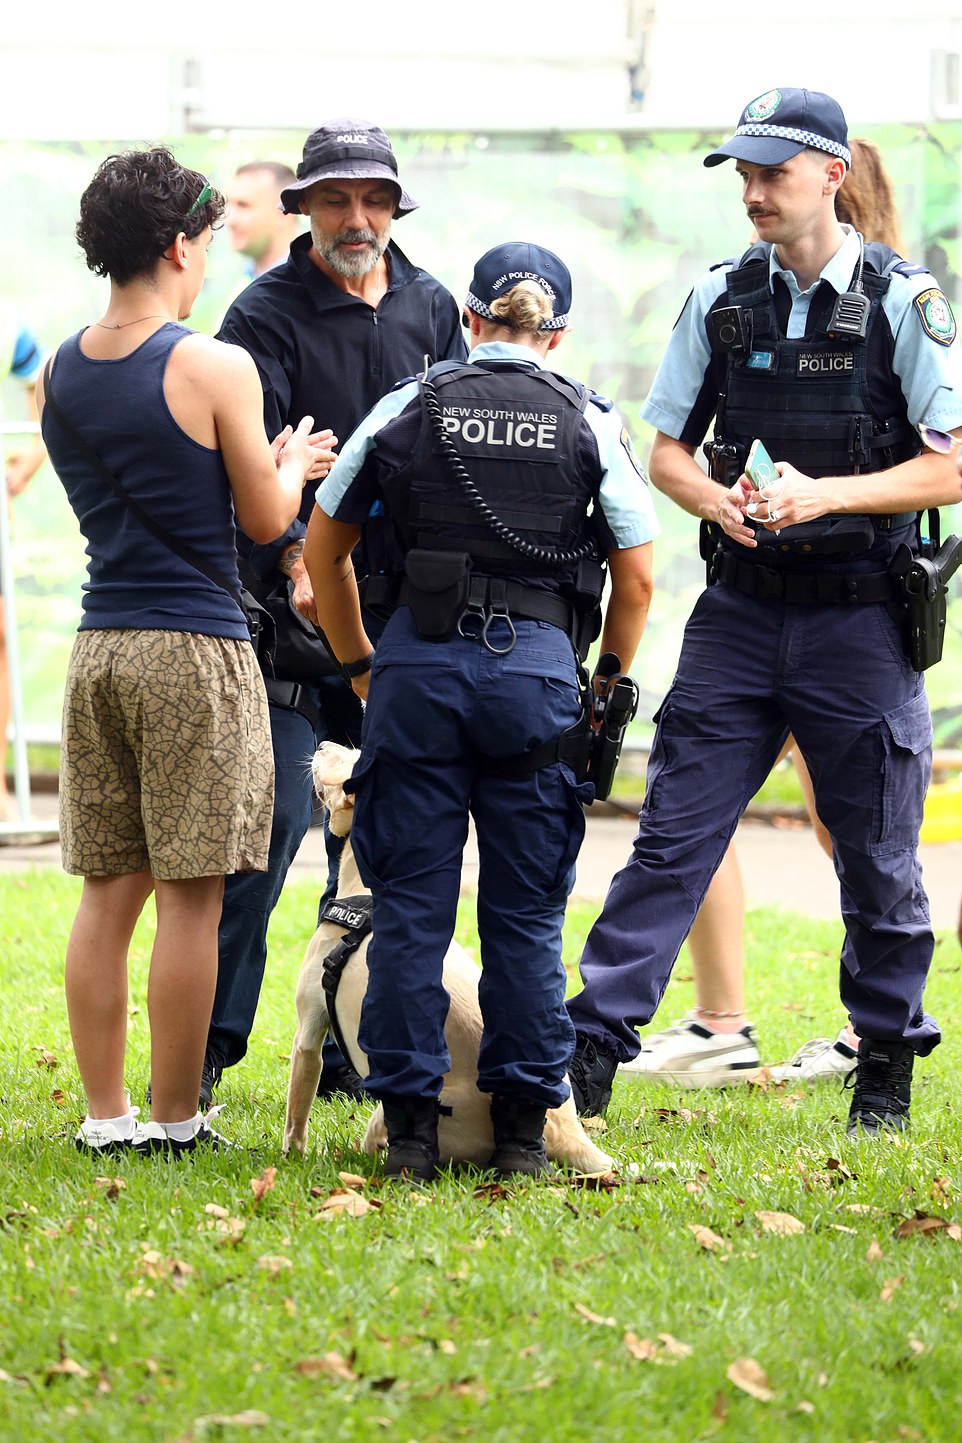 Upon arrival at the location, attendees were met by a wall of police officers and sniffer dogs